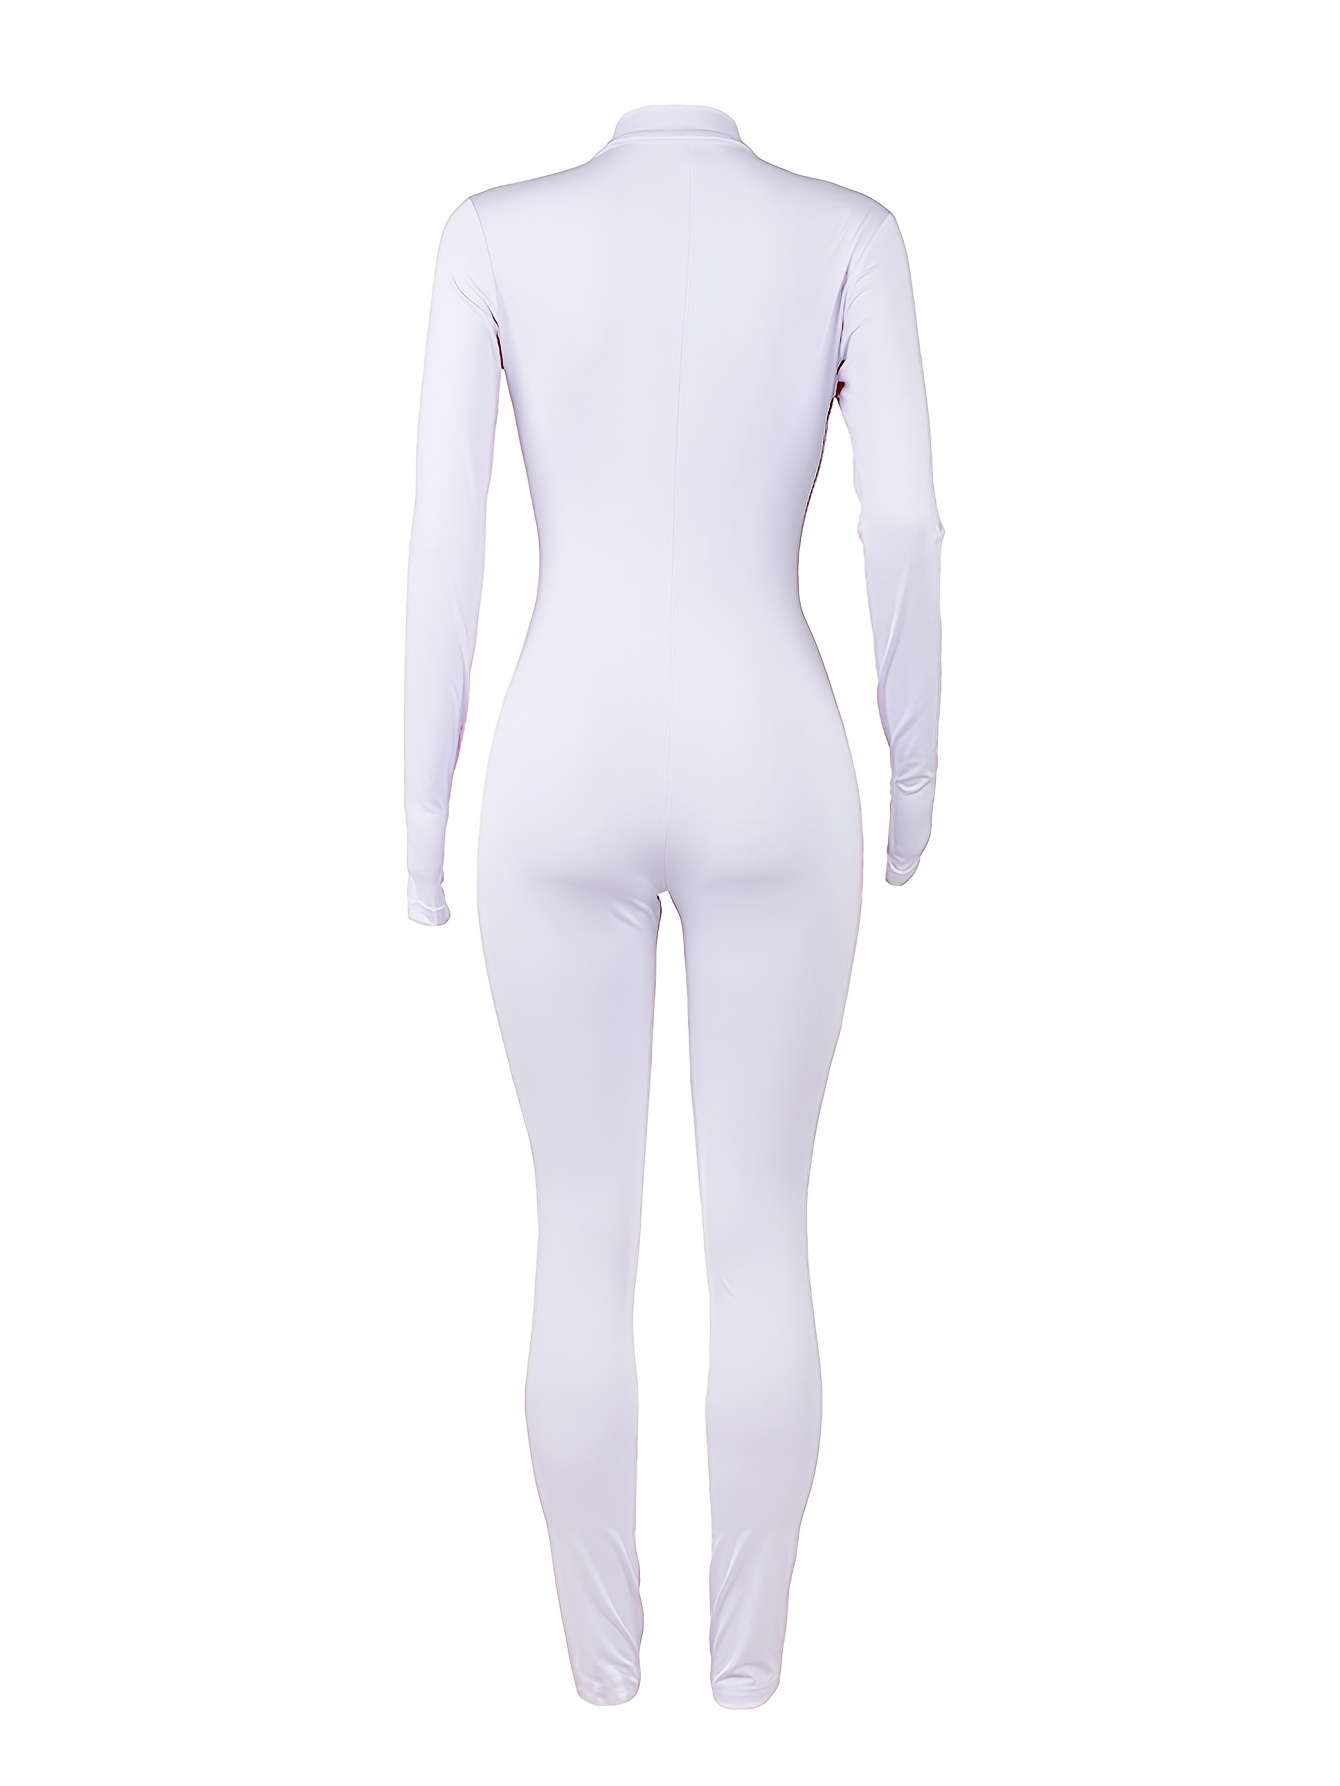 XLLAIS White Snug Fabric Bodycon Romper Suit With Zippers Sexy Long Lycra  Jumpsuit For Women, Club Overalls Included V200325 From Huang01, $21.19